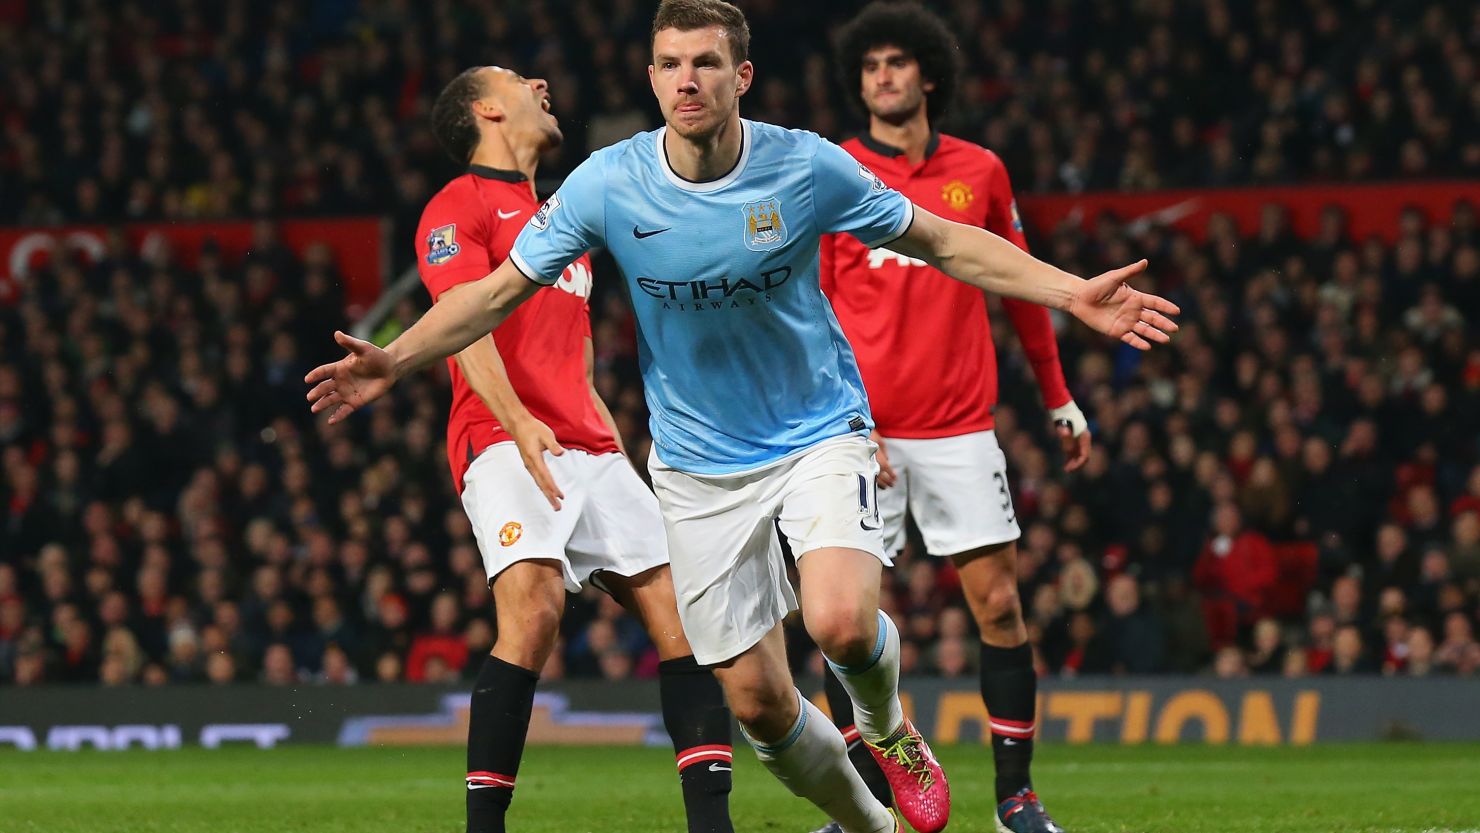 Edin Dzeko scored two goals for Manchester City at Old Trafford on Tuesday night.  